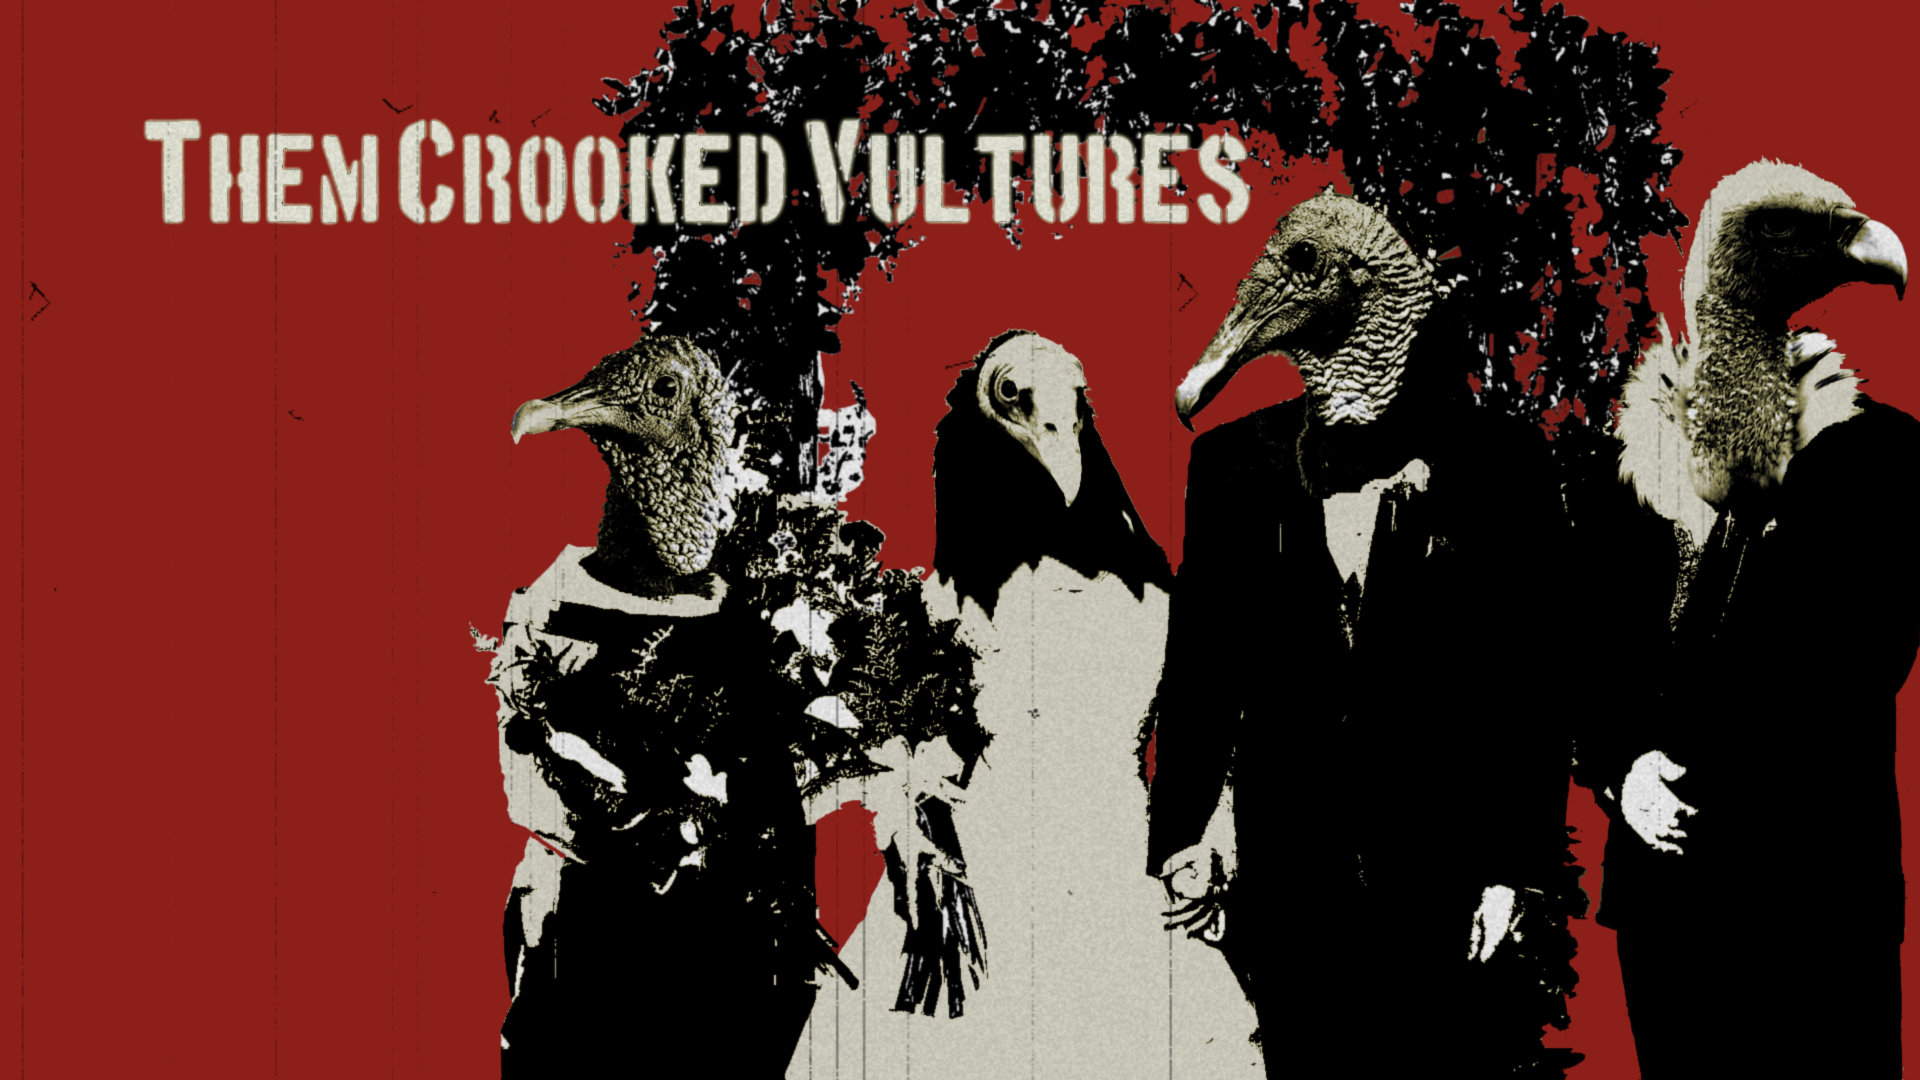 Download full hd 1920x1080 Them Crooked Vultures desktop background ID:399084 for free